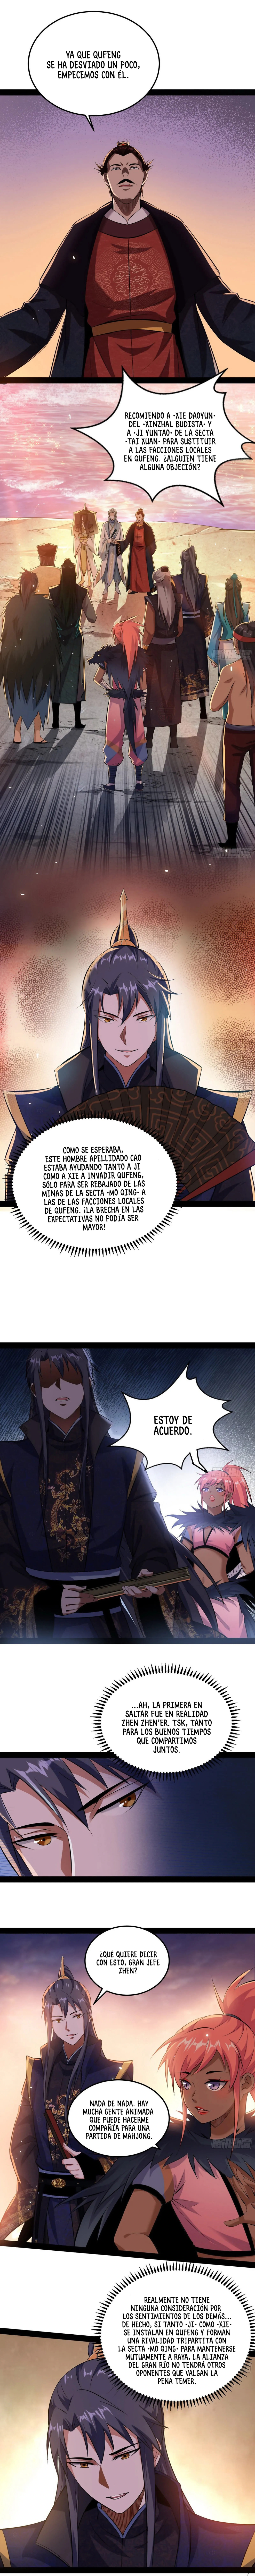 Manga Soy un dios maligno Chapter 81 image number 8